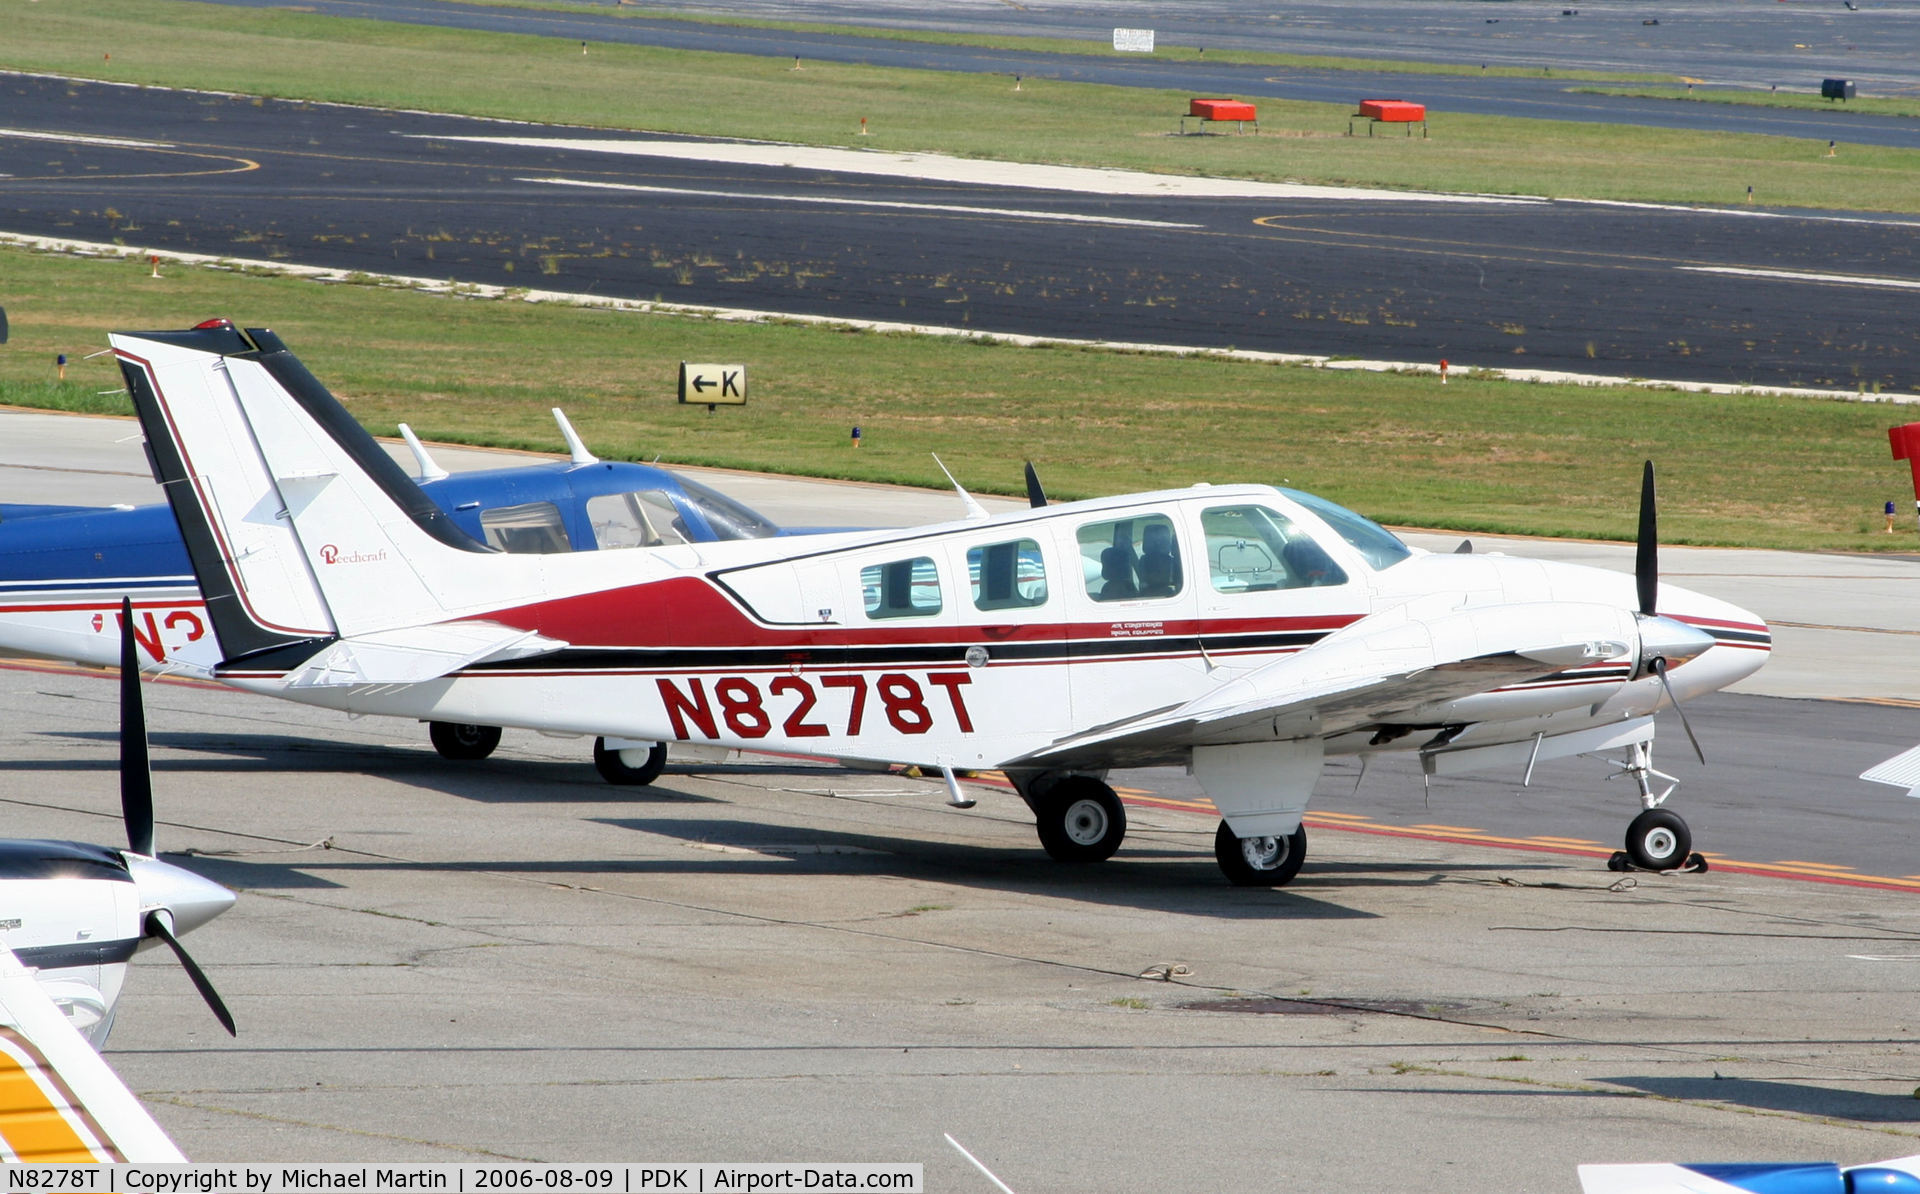 N8278T, 1992 Beech 58 Baron C/N TH-1672, Tied down @ Epps with other aircraft